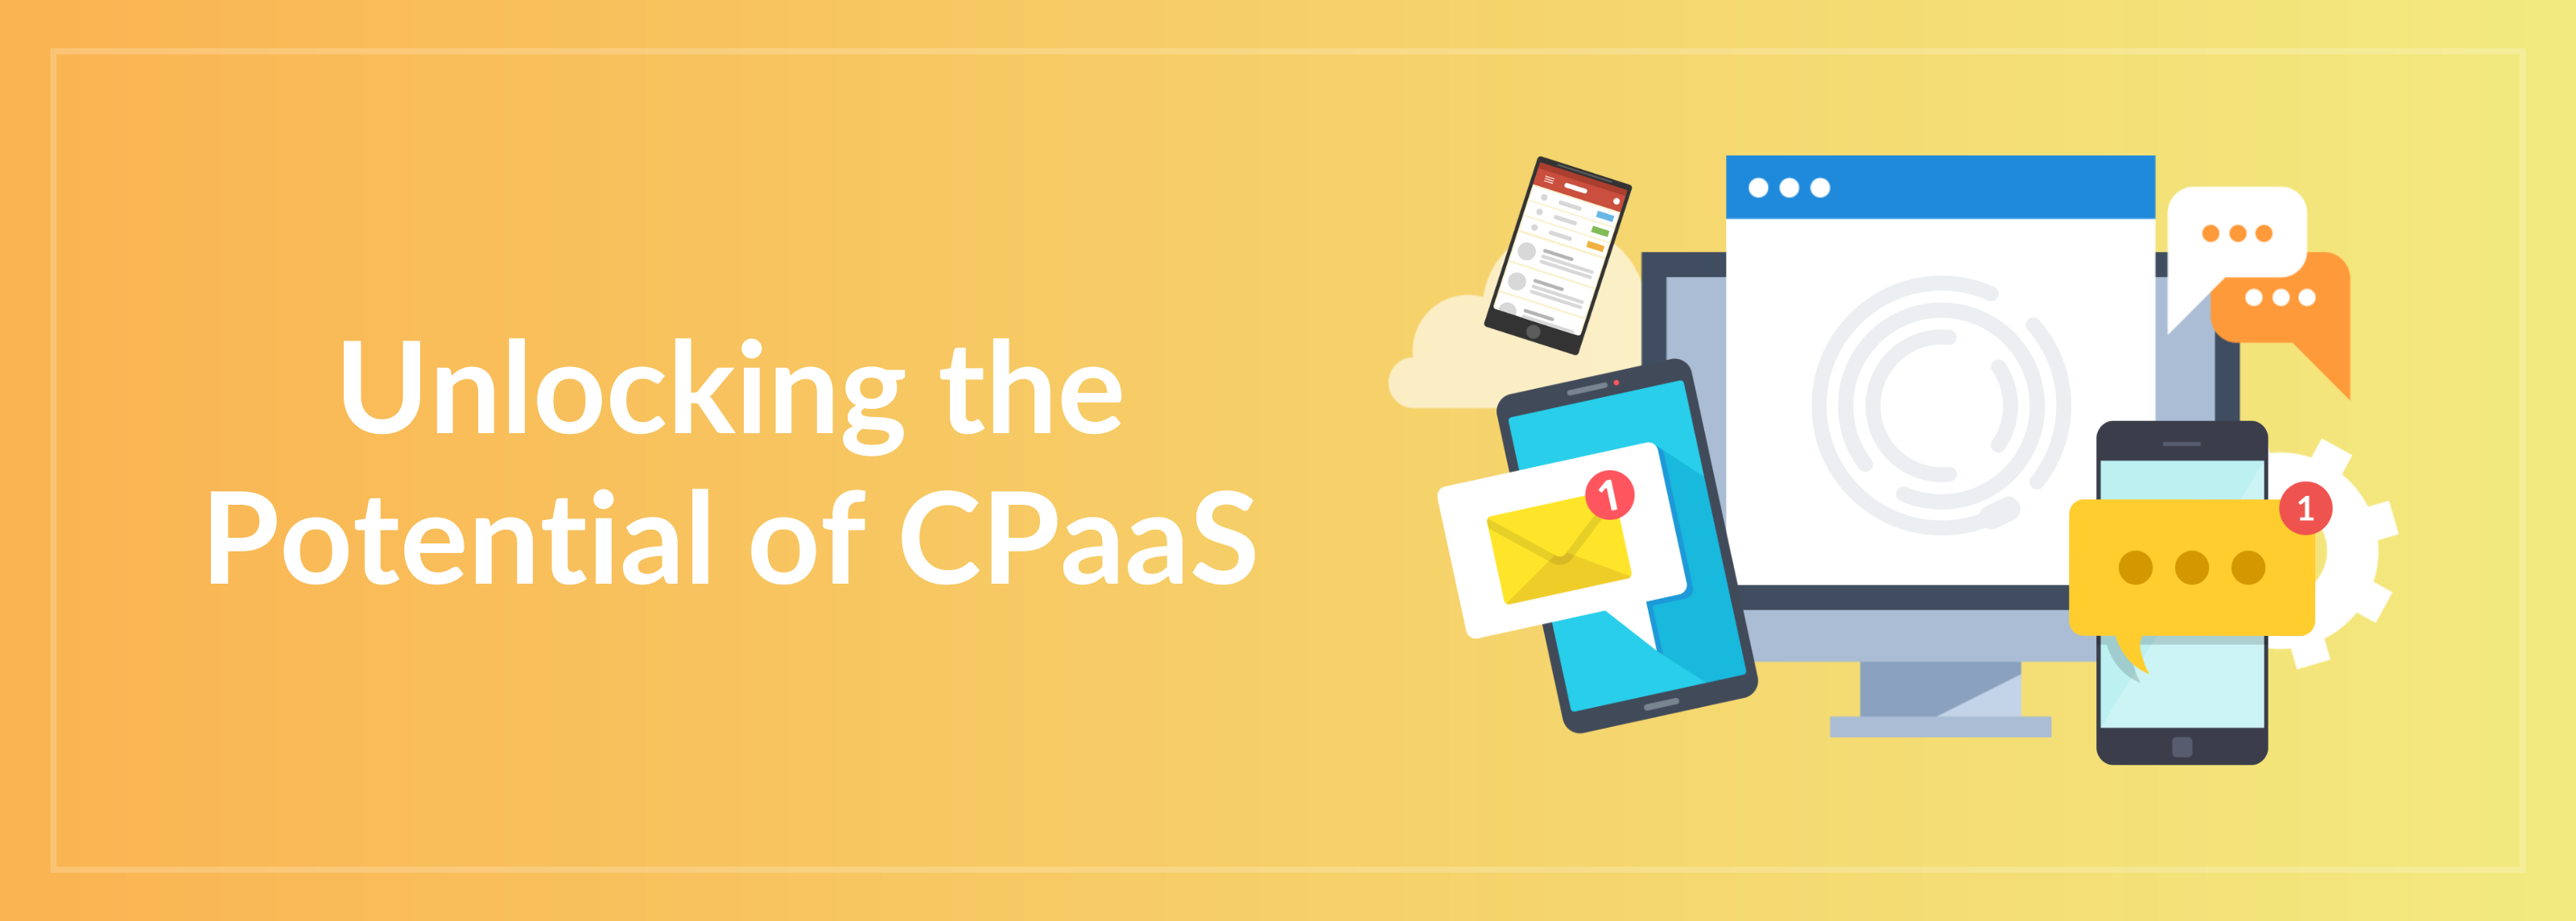 Unlocking the Potential of CPaaS